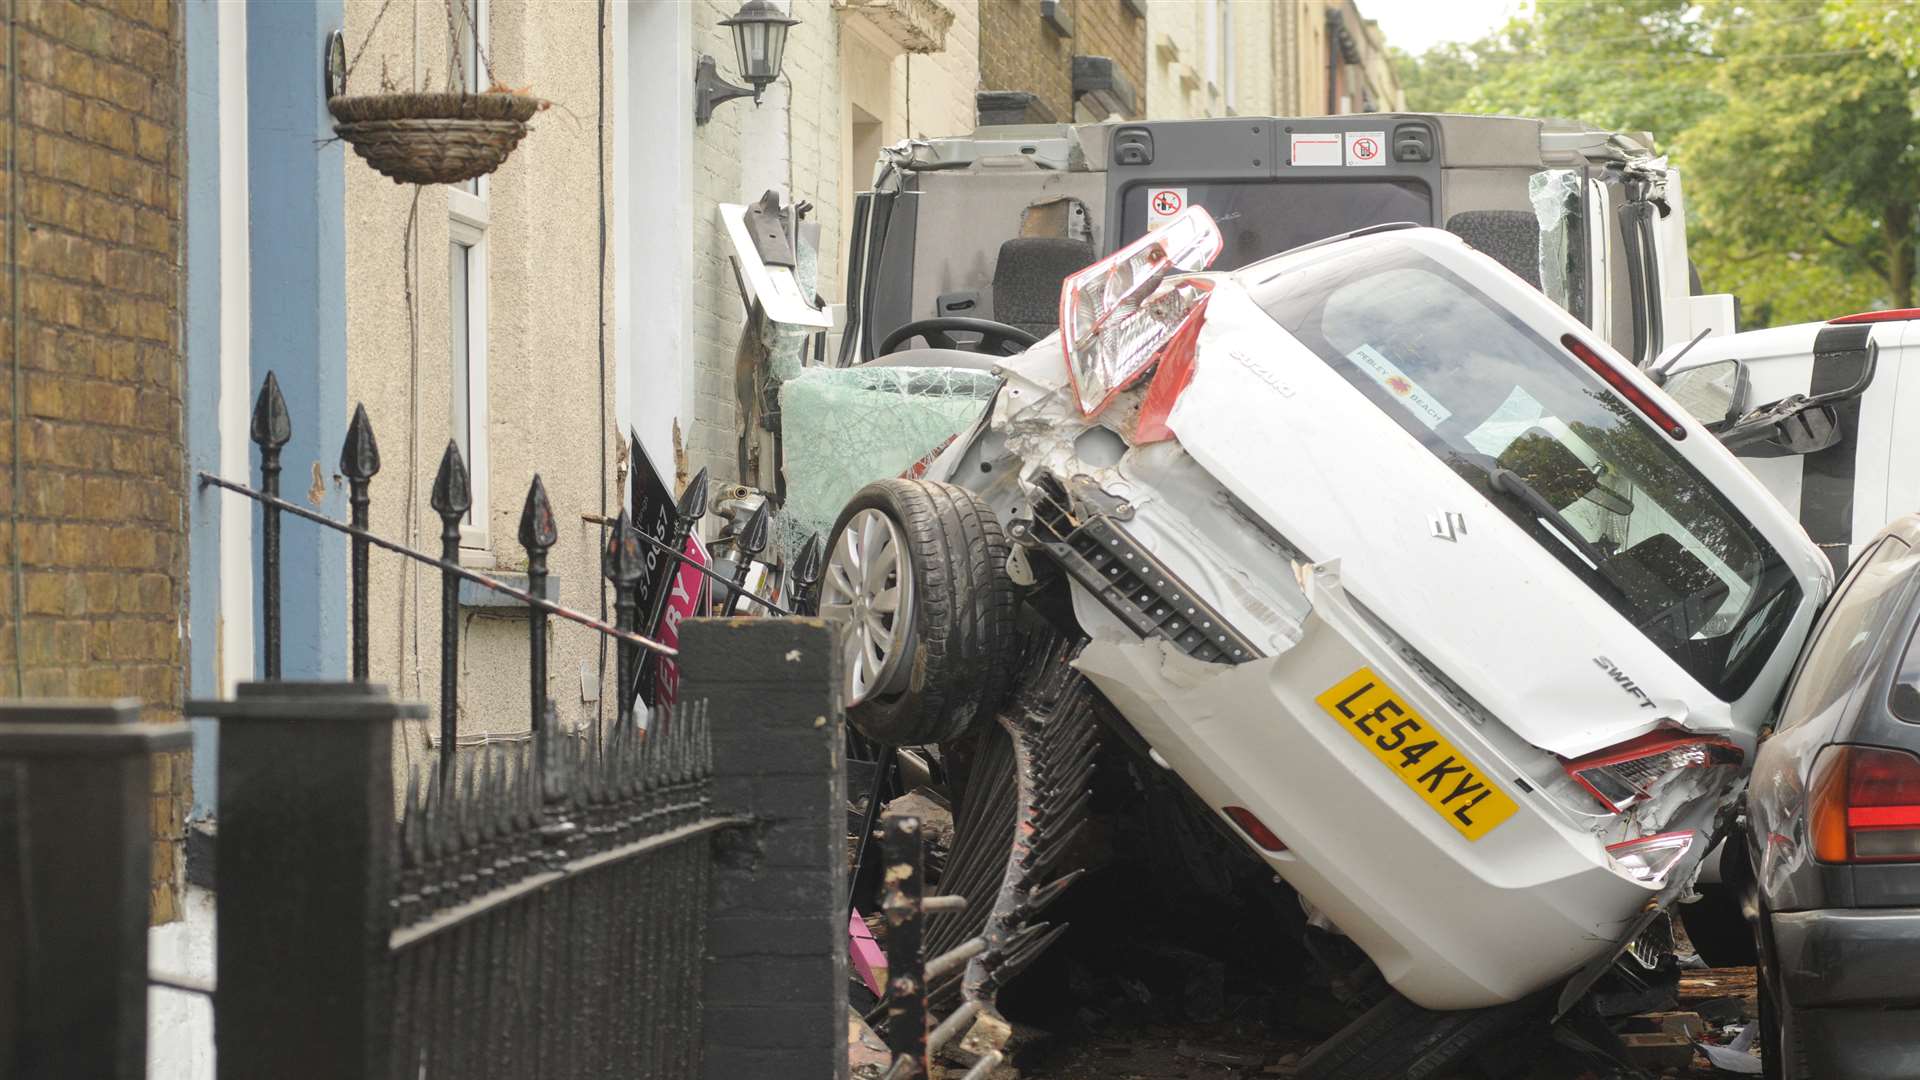 Cars were squashed up against homes during the collision